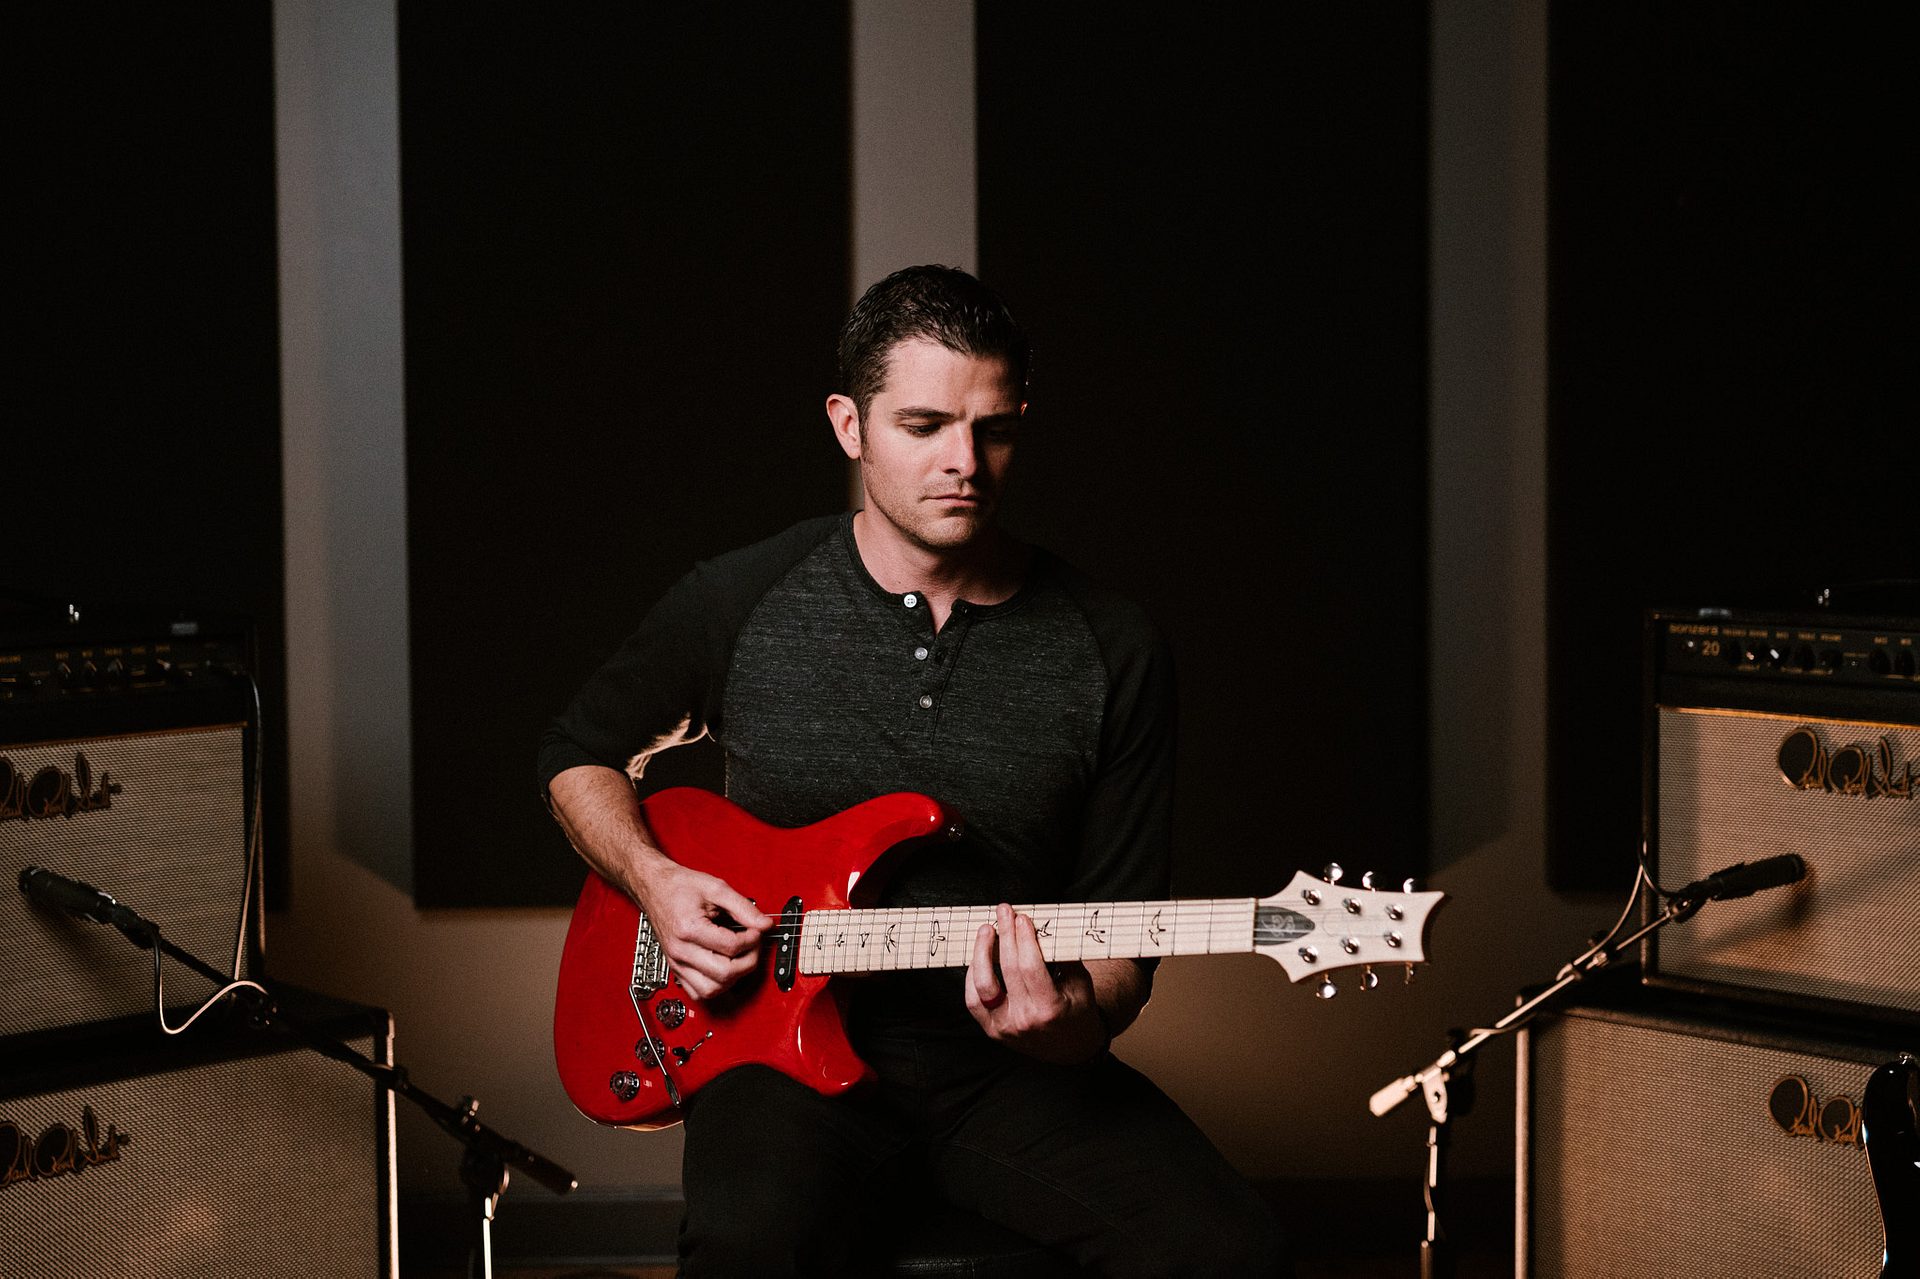 Mark Lettieri Plays Guitar on New Jackson's "Can You Feel It" Cover ft. Kirk Franklin